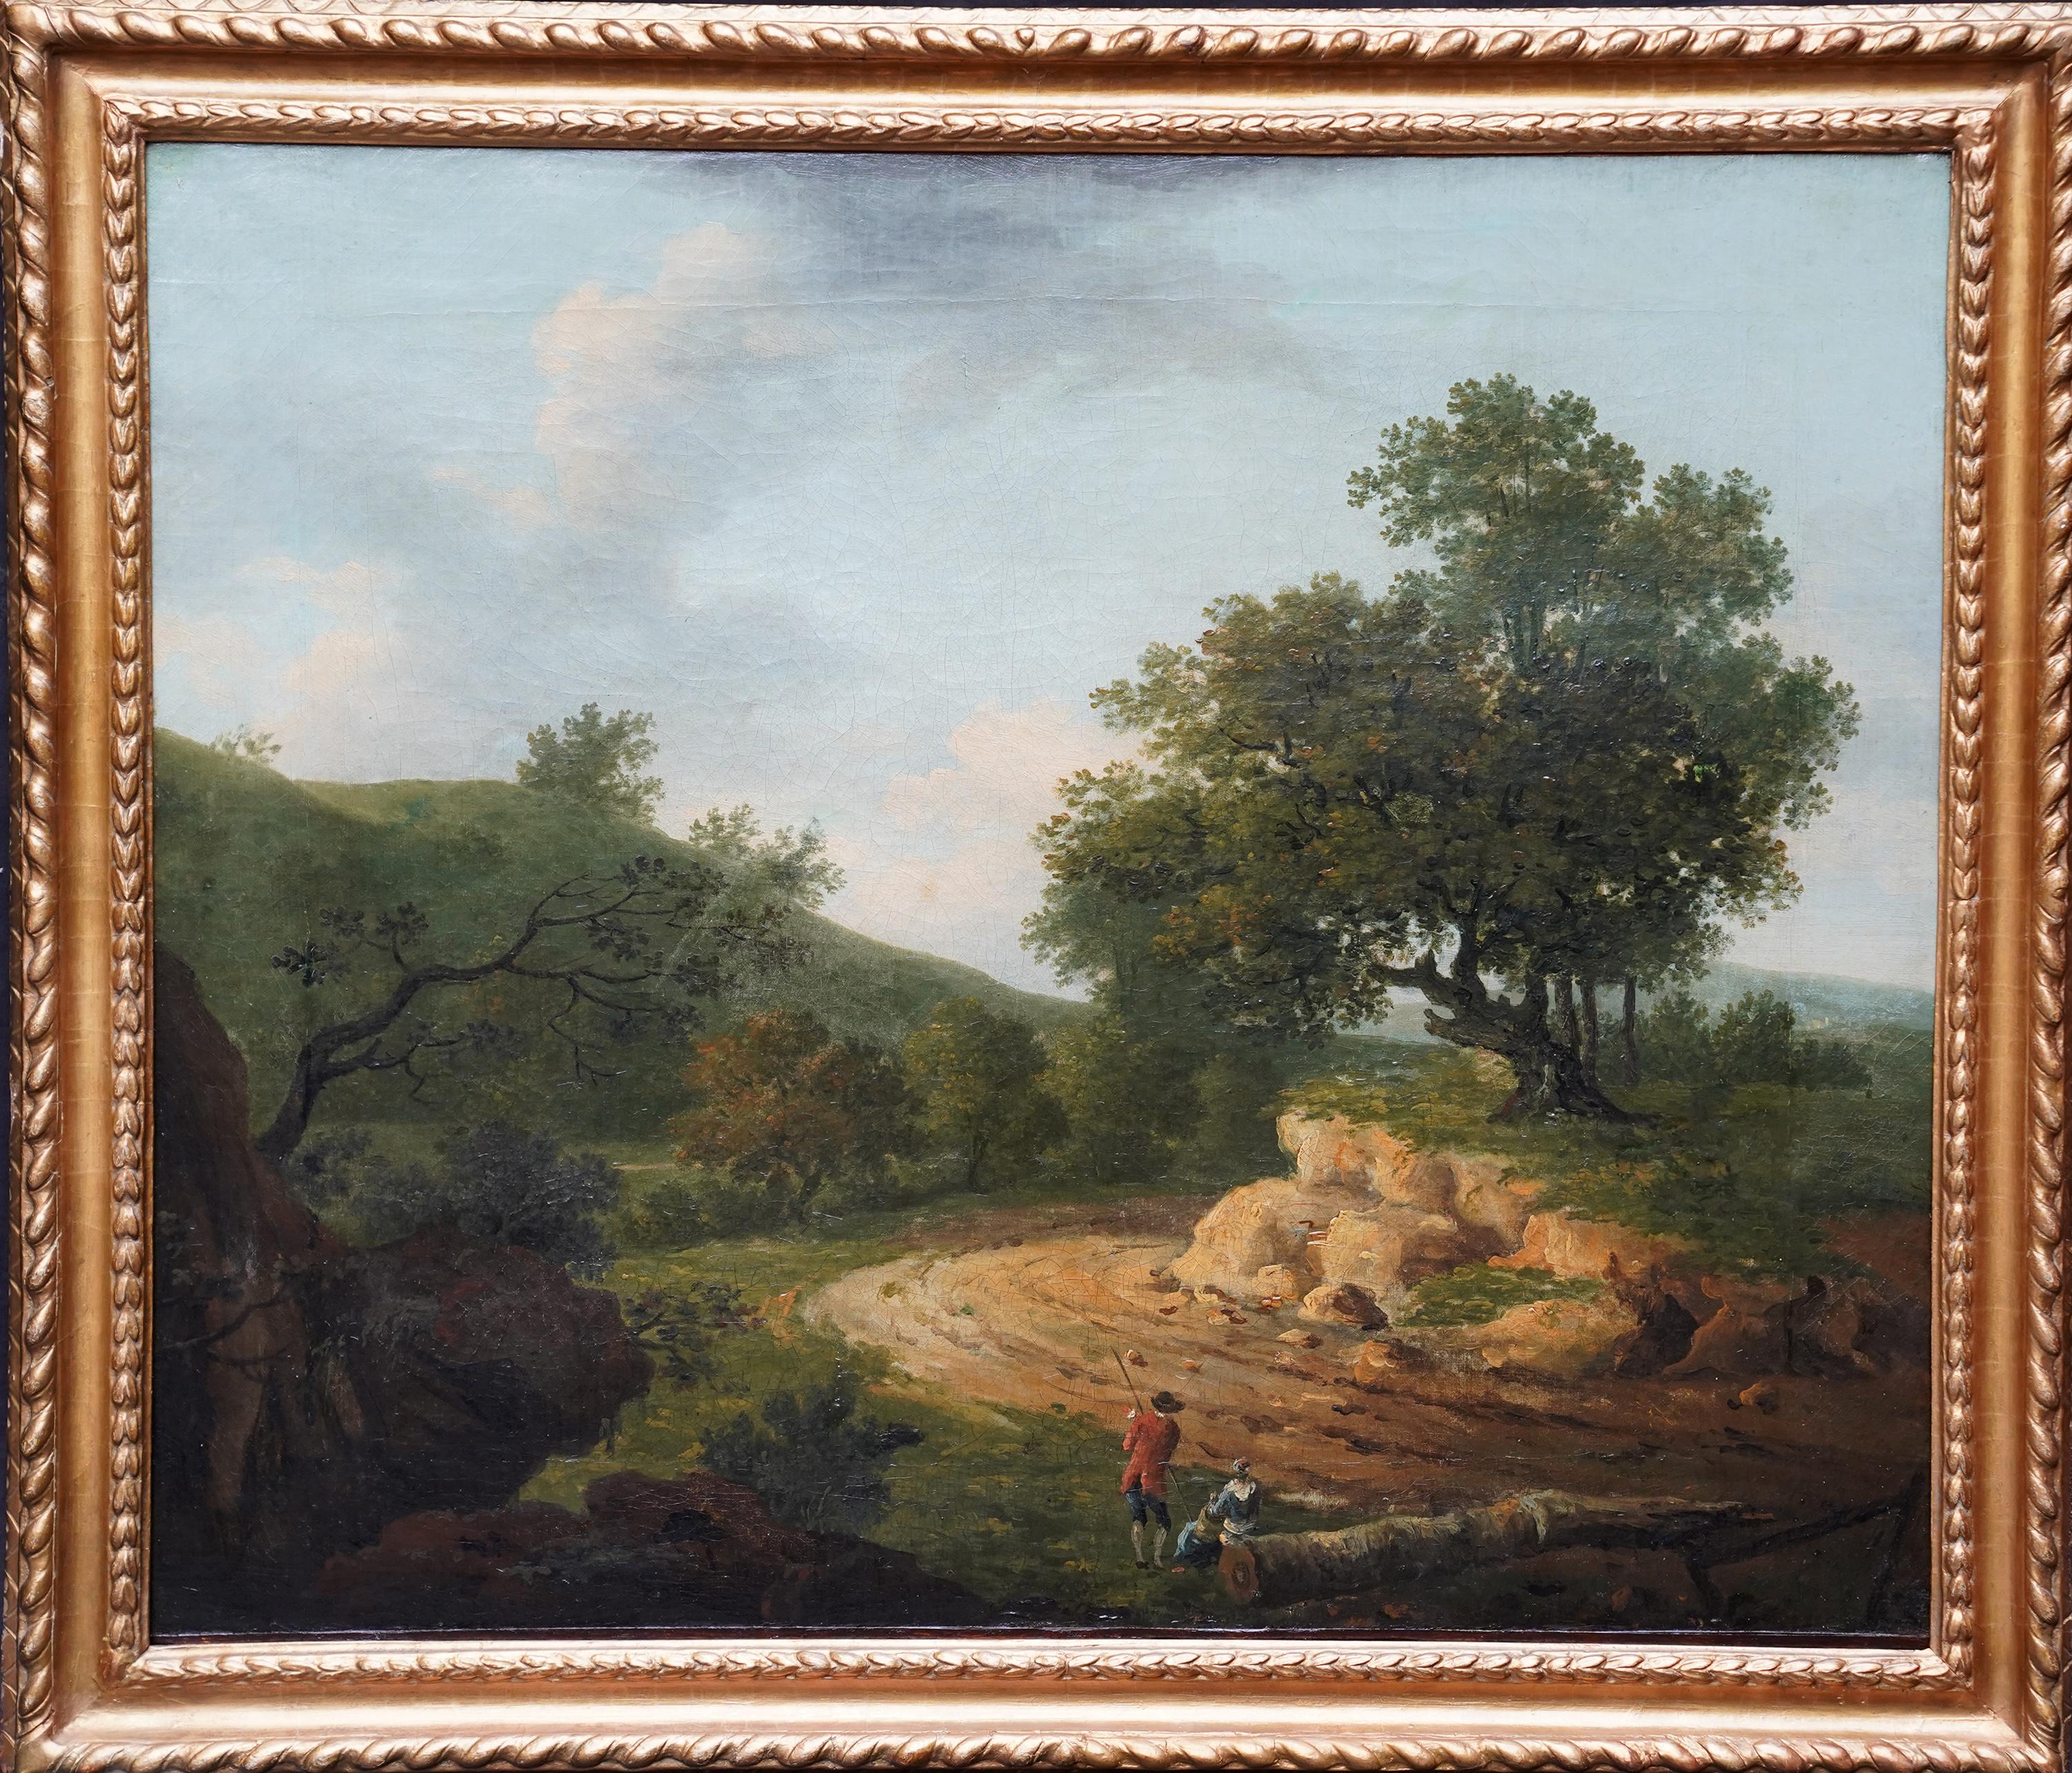 Richard Wilson Landscape Painting - Wooded Landscape with Figures - British 18th century Old Master art oil painting